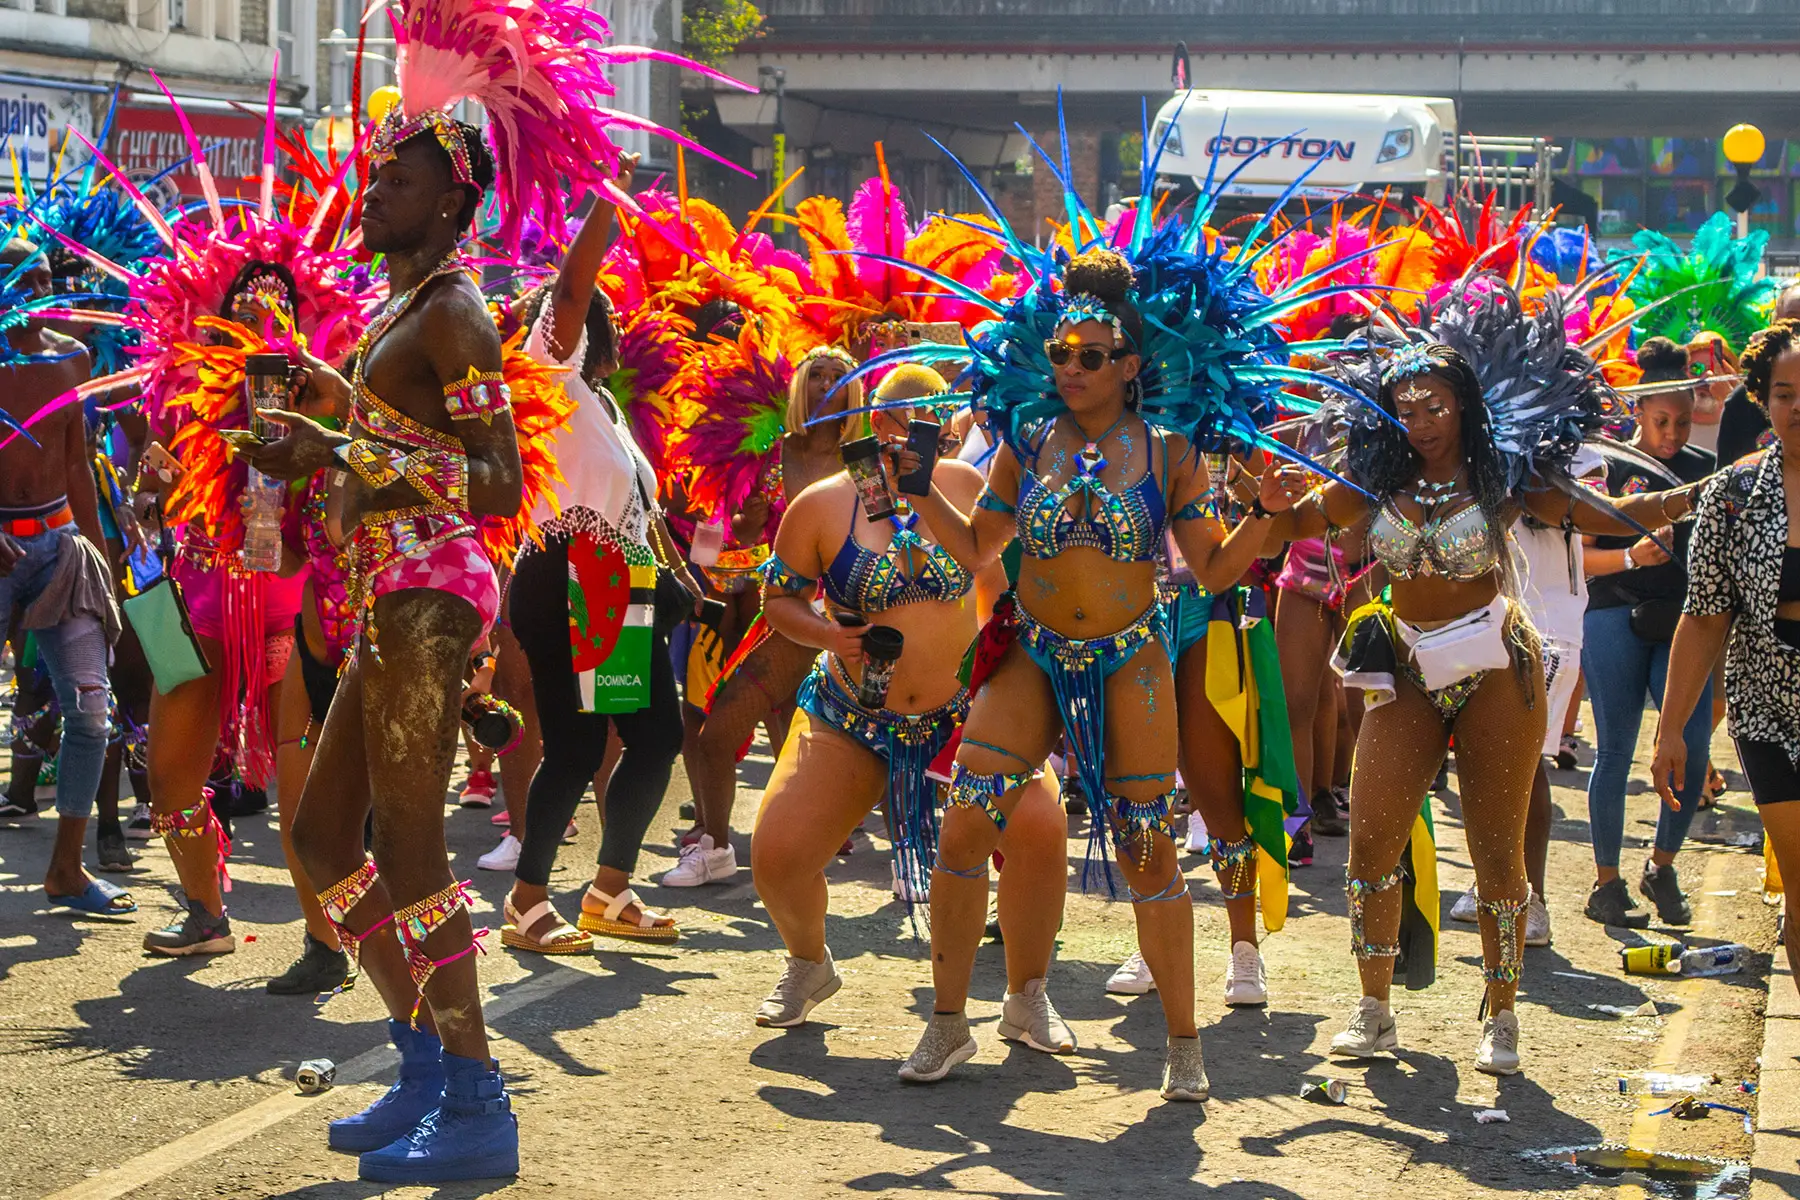 People in samba outfits at Notting Hill Carnival